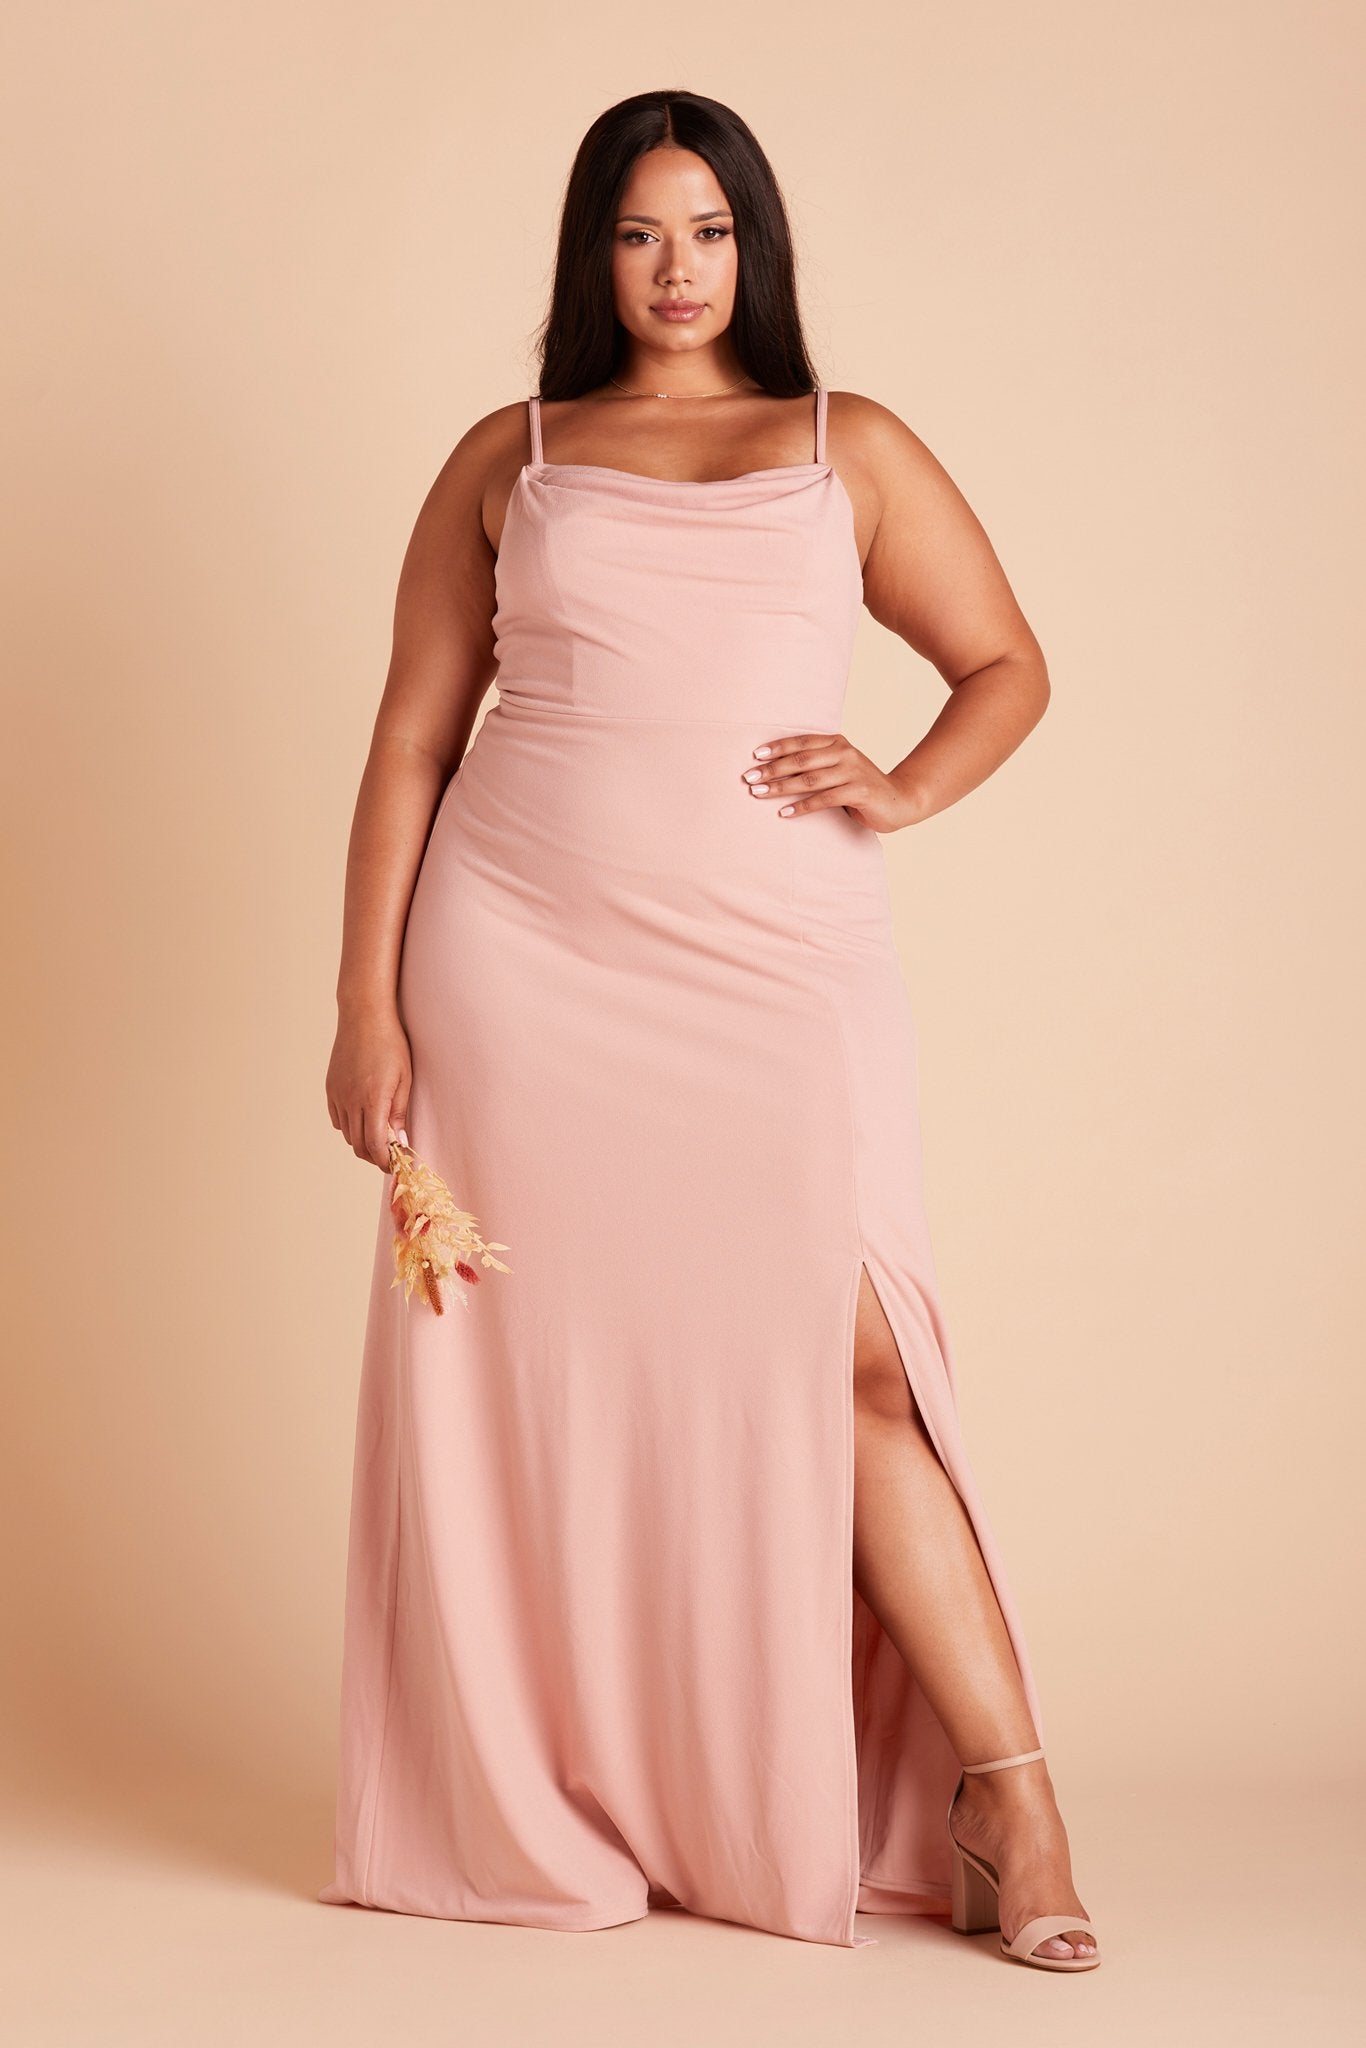 Front view of the floor-length Ash Plus Size Bridesmaid Dress in dusty rose crepe by Birdy Grey with a slightly draped cowl neck front. The flowing skirt features a slit over the front left leg.